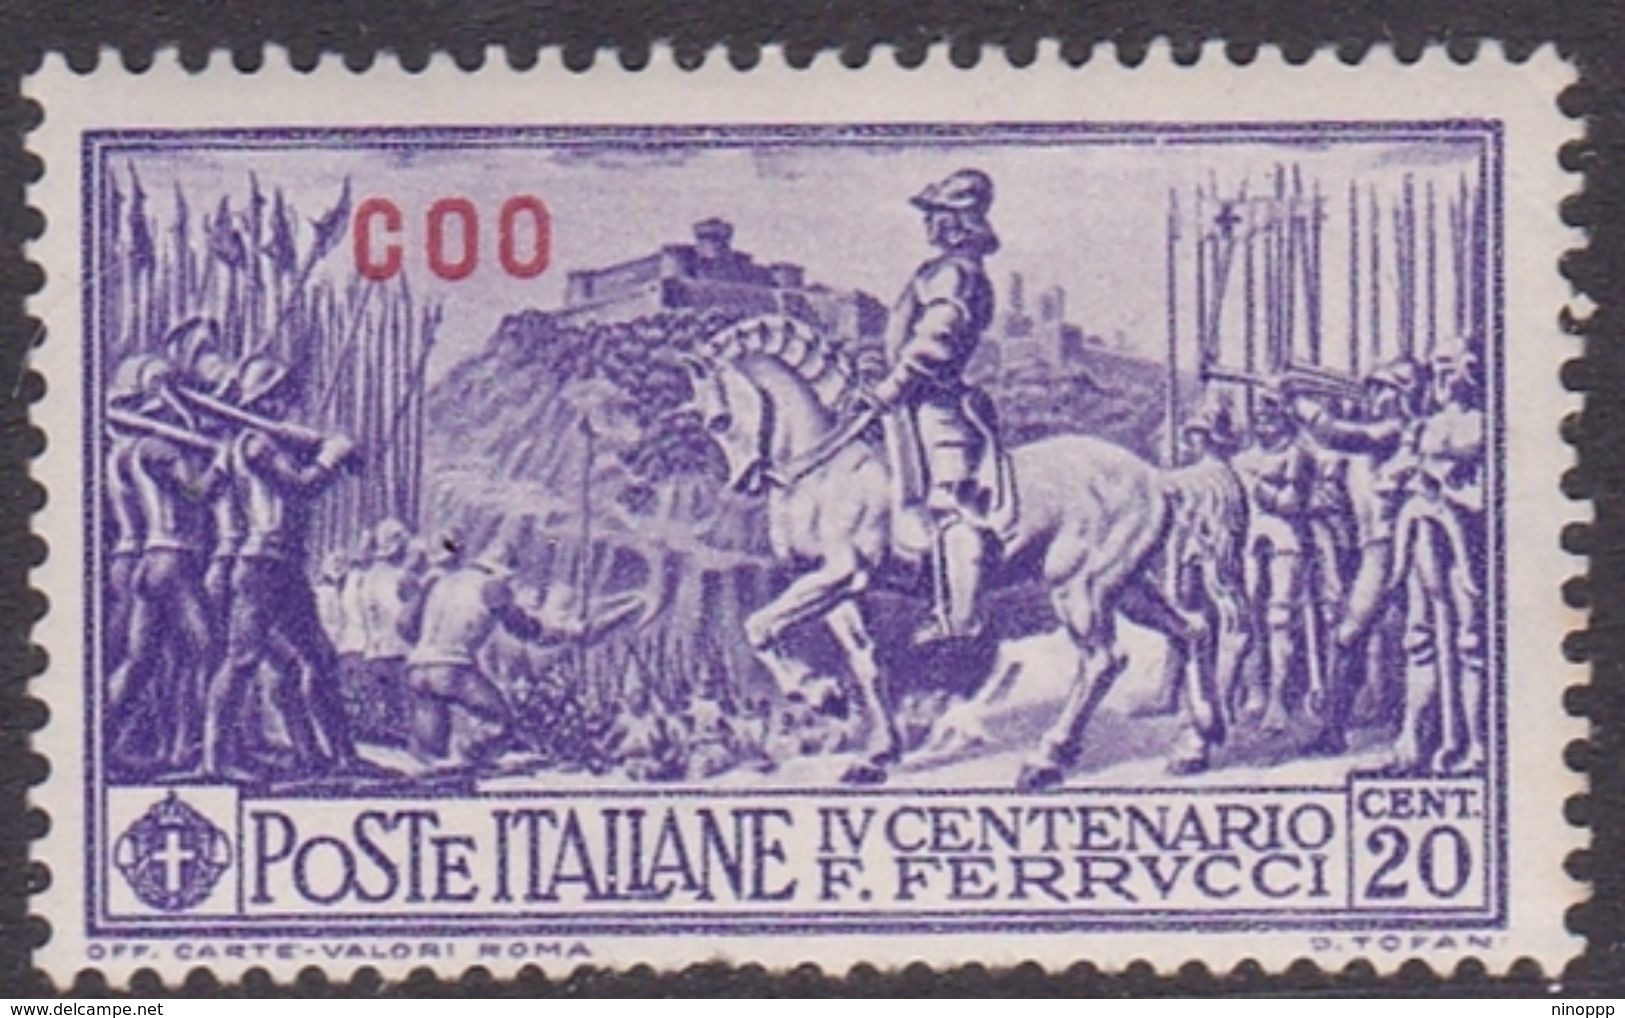 Italy-Colonies And Territories-Aegean-Coo S 12  1930 Ferrucci 20c Violet MH - Aegean (Coo)